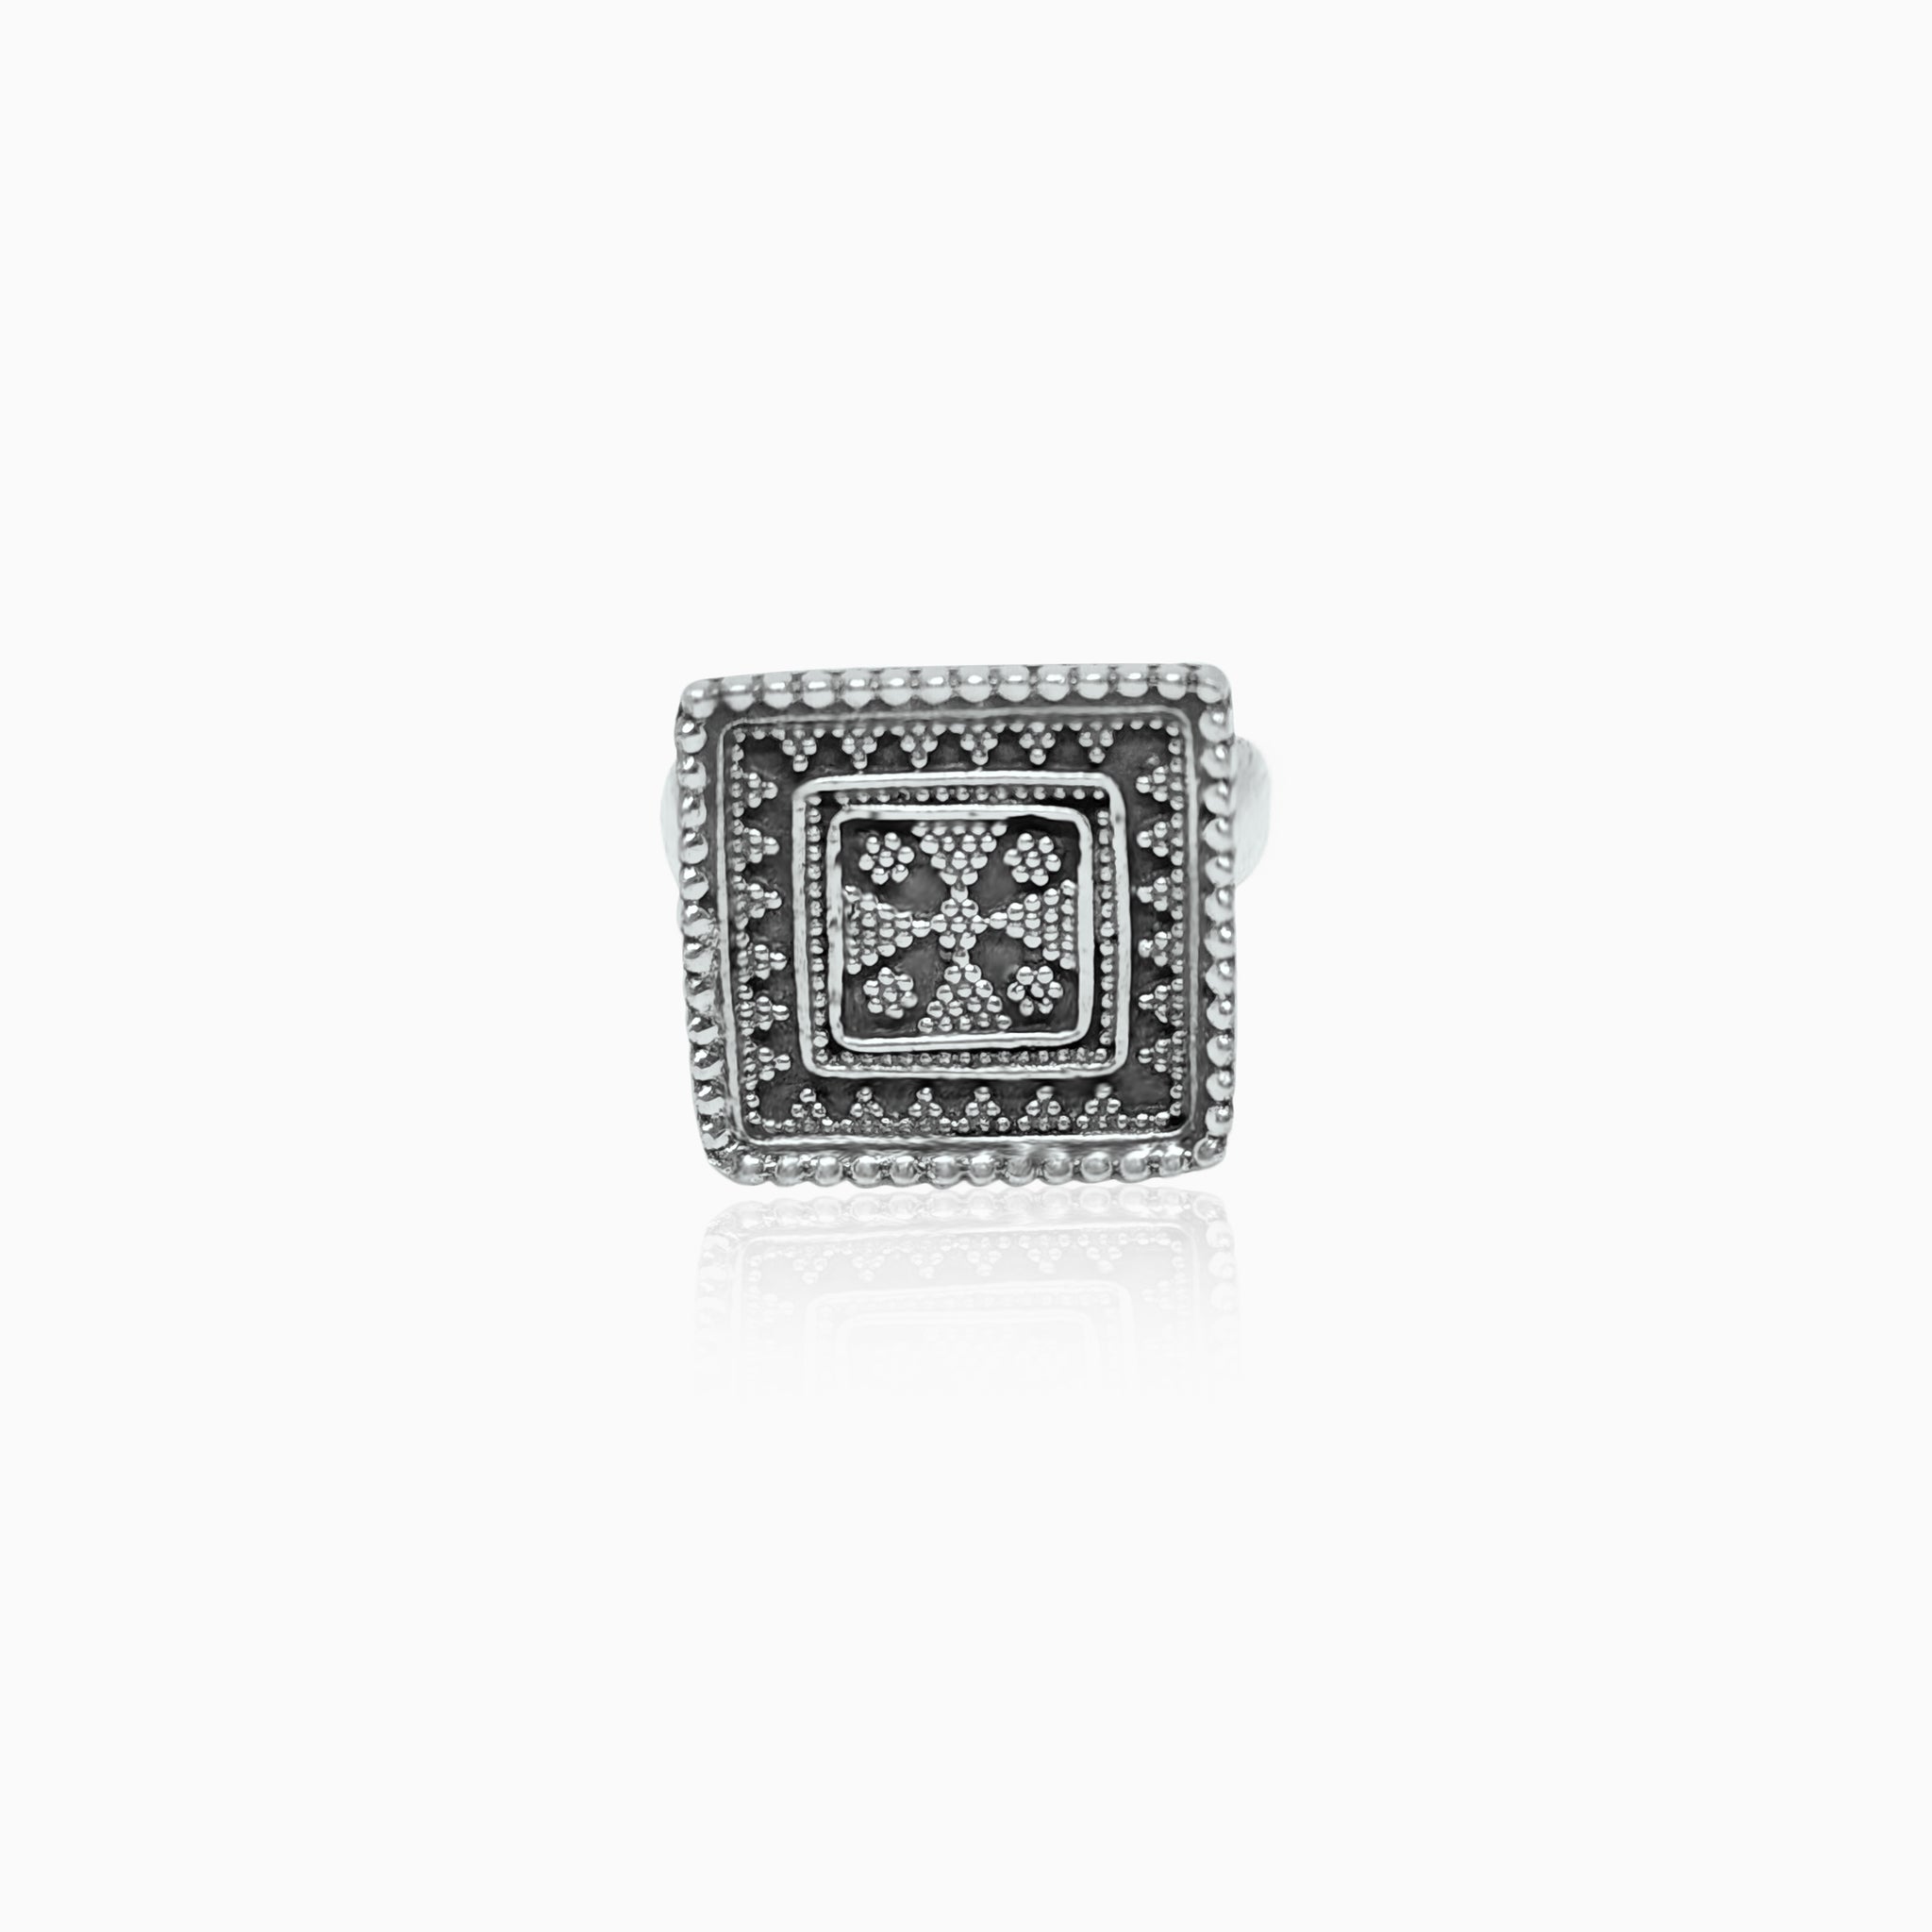 Silver Oxidised Engraved Square Adjustable Ring